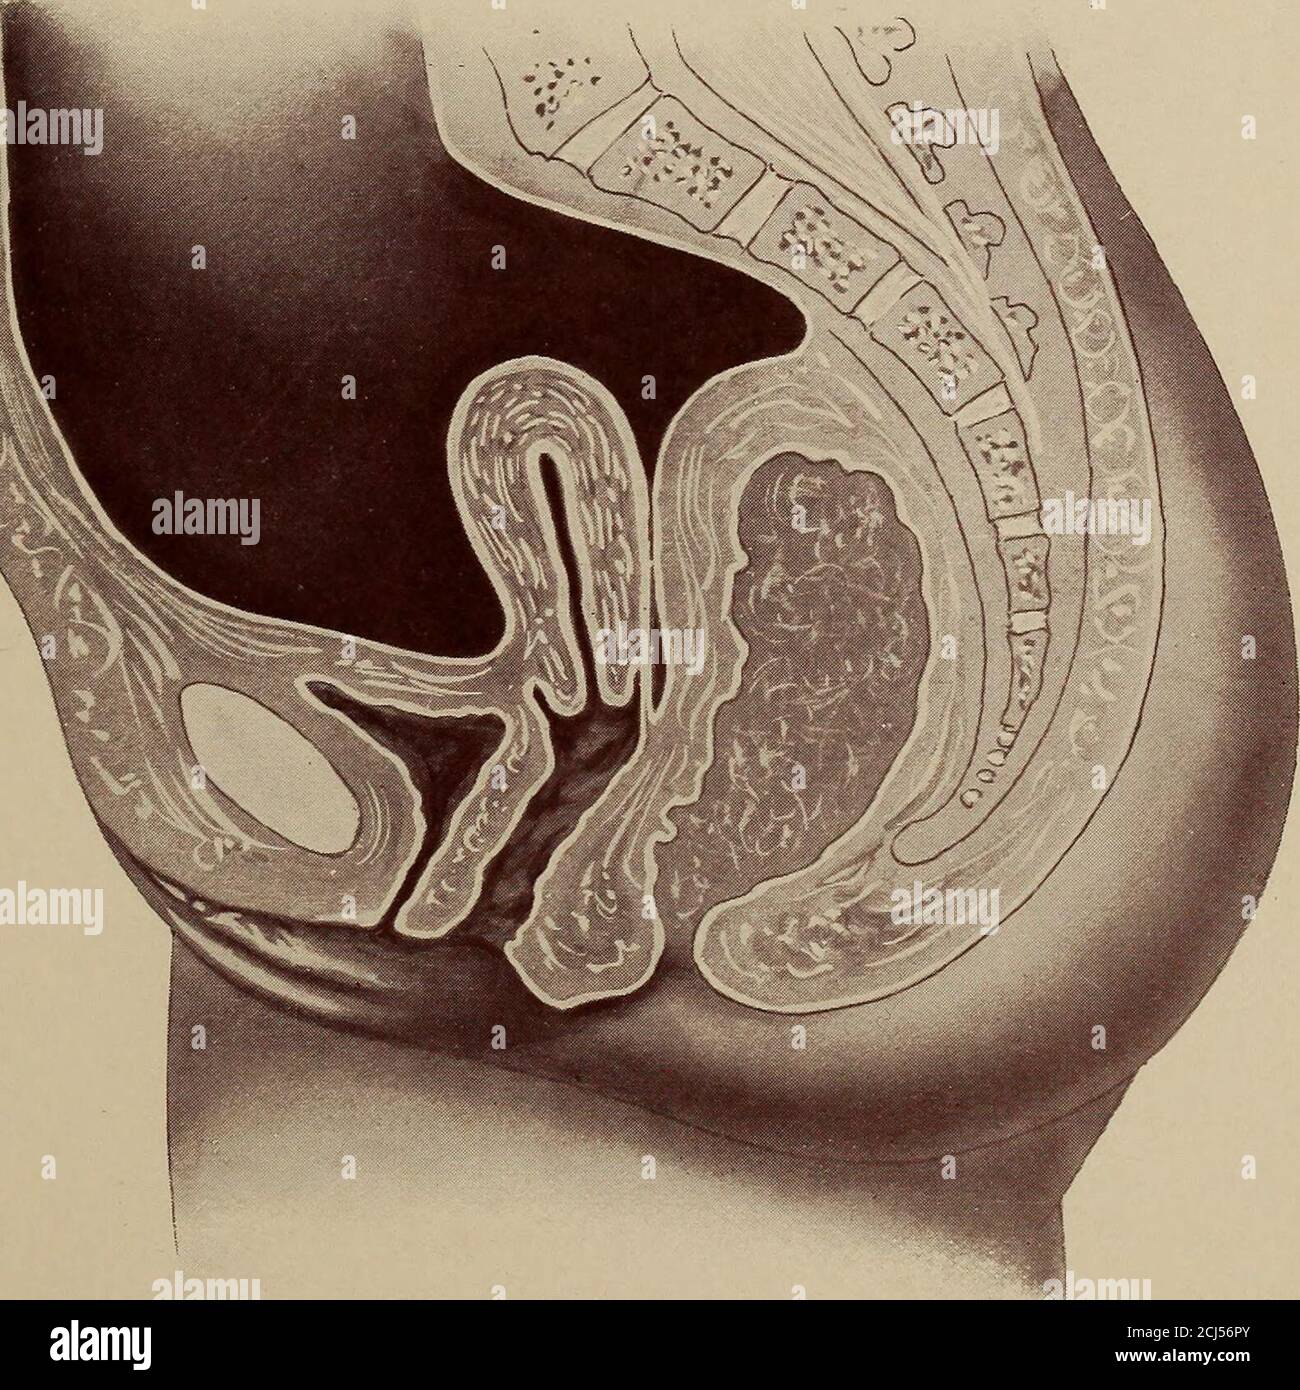 . The diagnosis of diseases of women . Anteposition of tine uterus. A retrouterine haematoeele fills theeul-de-sae of Douglas and the space between the uterus and. sacrum.The uterus is crowded forward. FIG. 2,. Anteposition. The loaded rectum crowds the uterus forward intoanteposition when the bladder is empty. The cul-de-sac of Douglasis almost obliterated. When the rectum is empty the uterus will fallback into the normal position. PLATE XXVI. FIG. Stock Photo